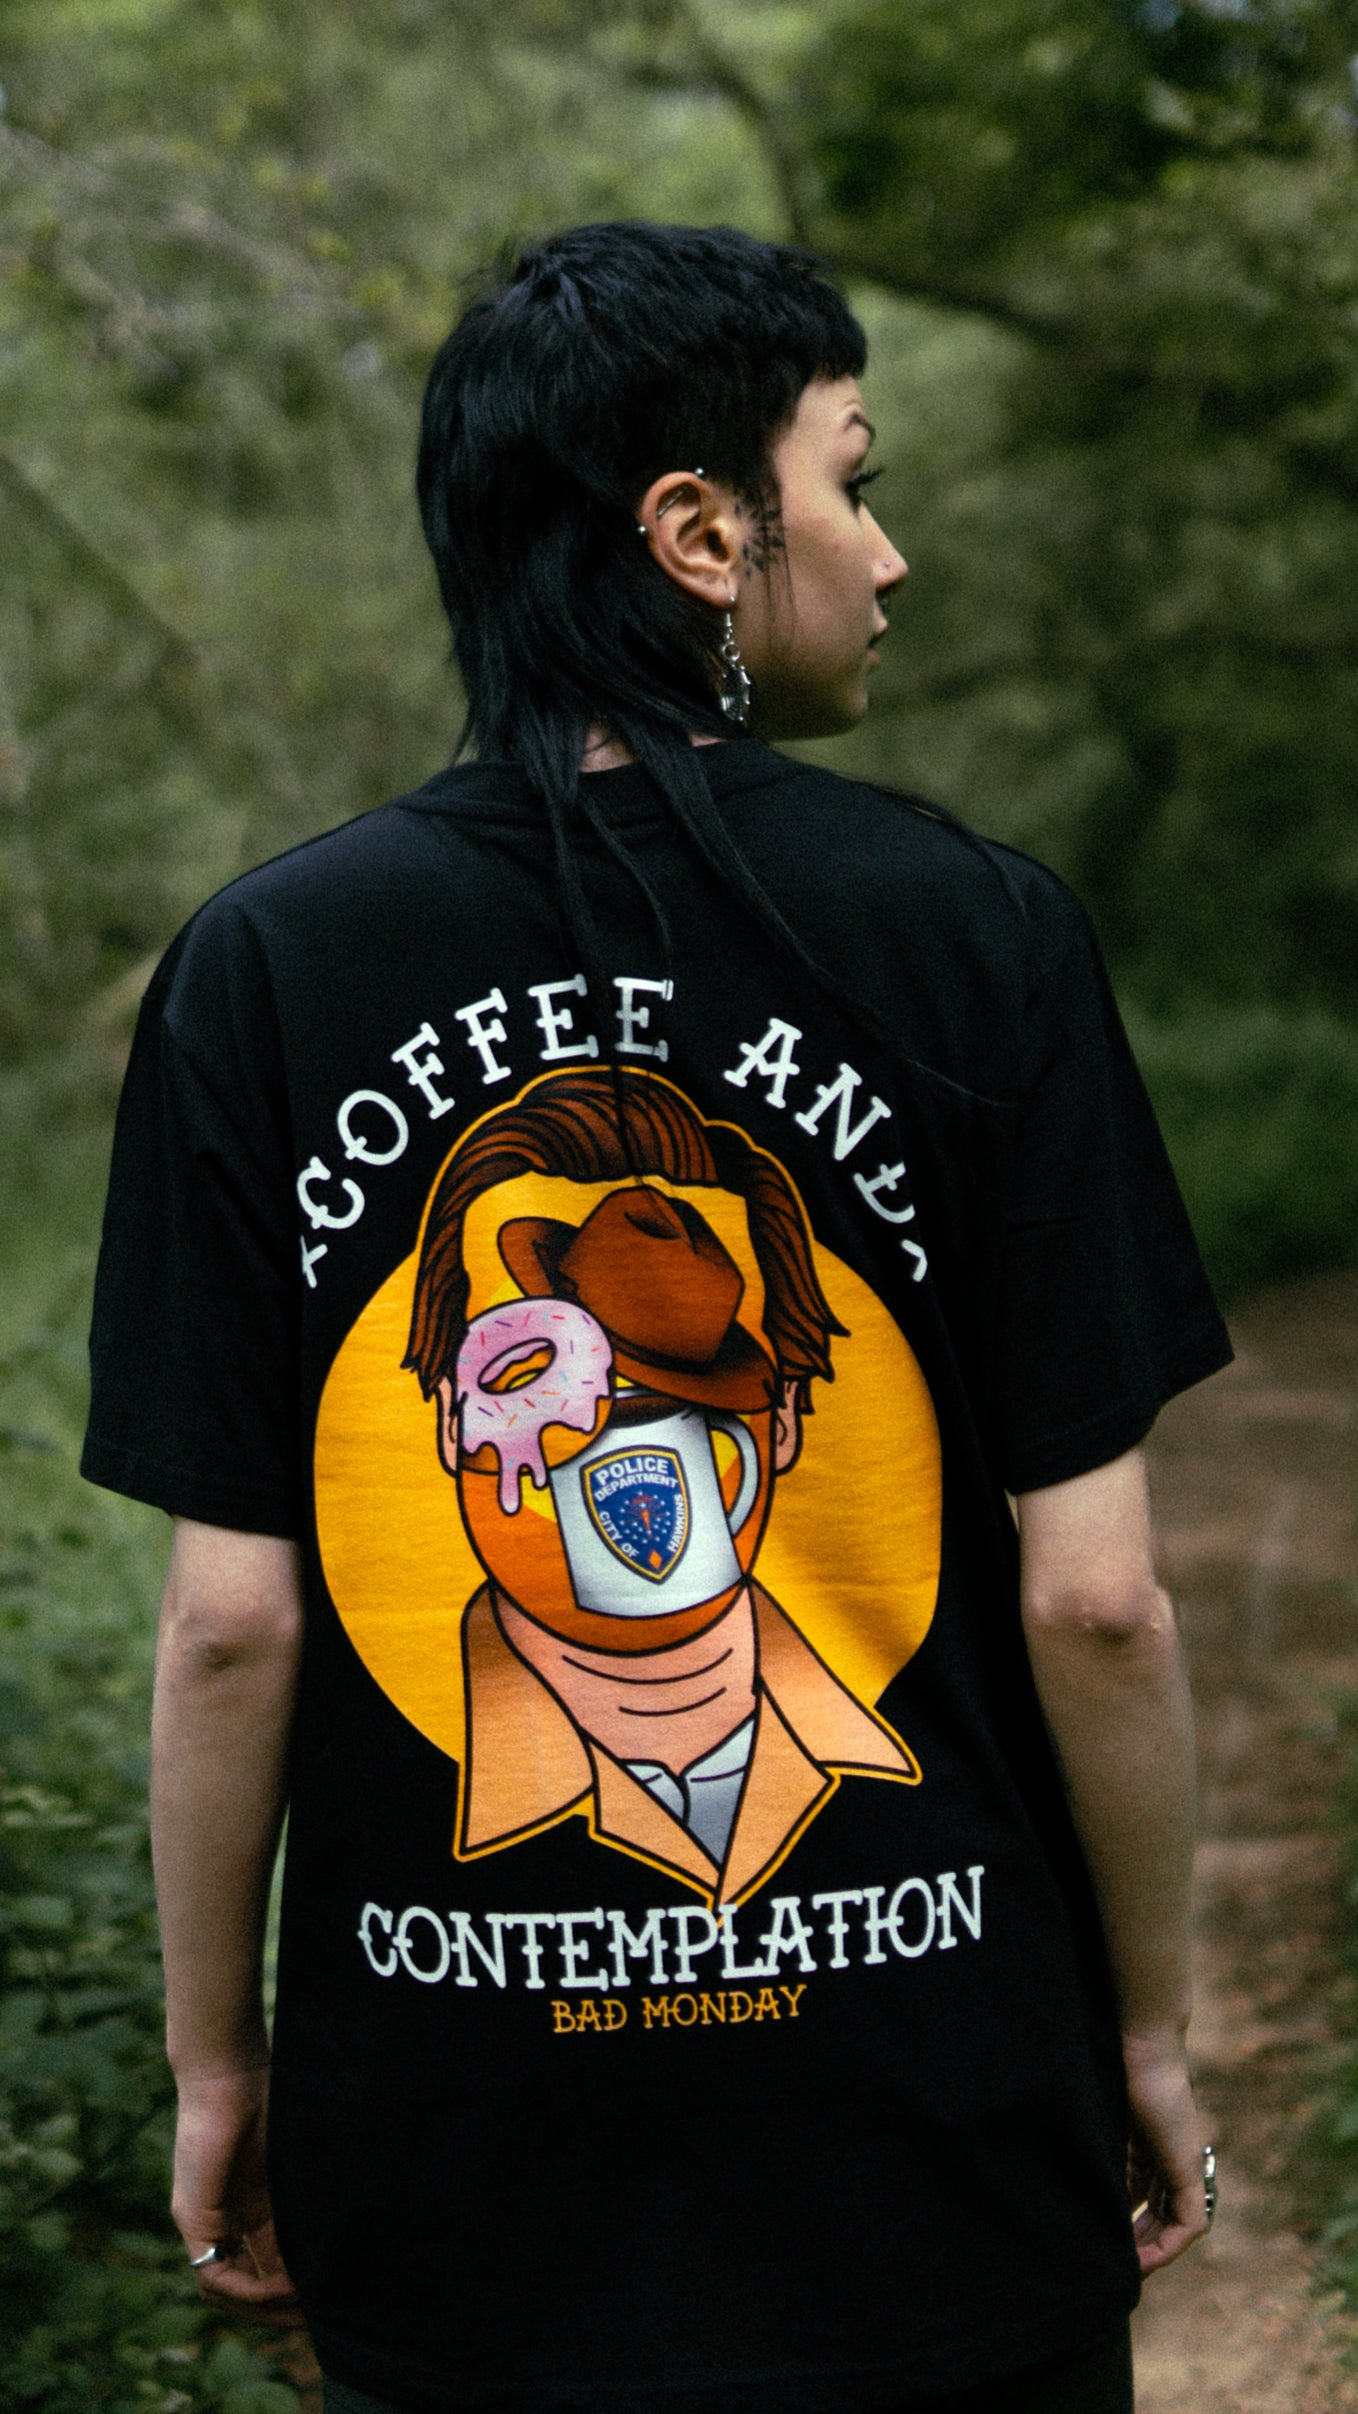 Image of Coffee & Contemplation Tee